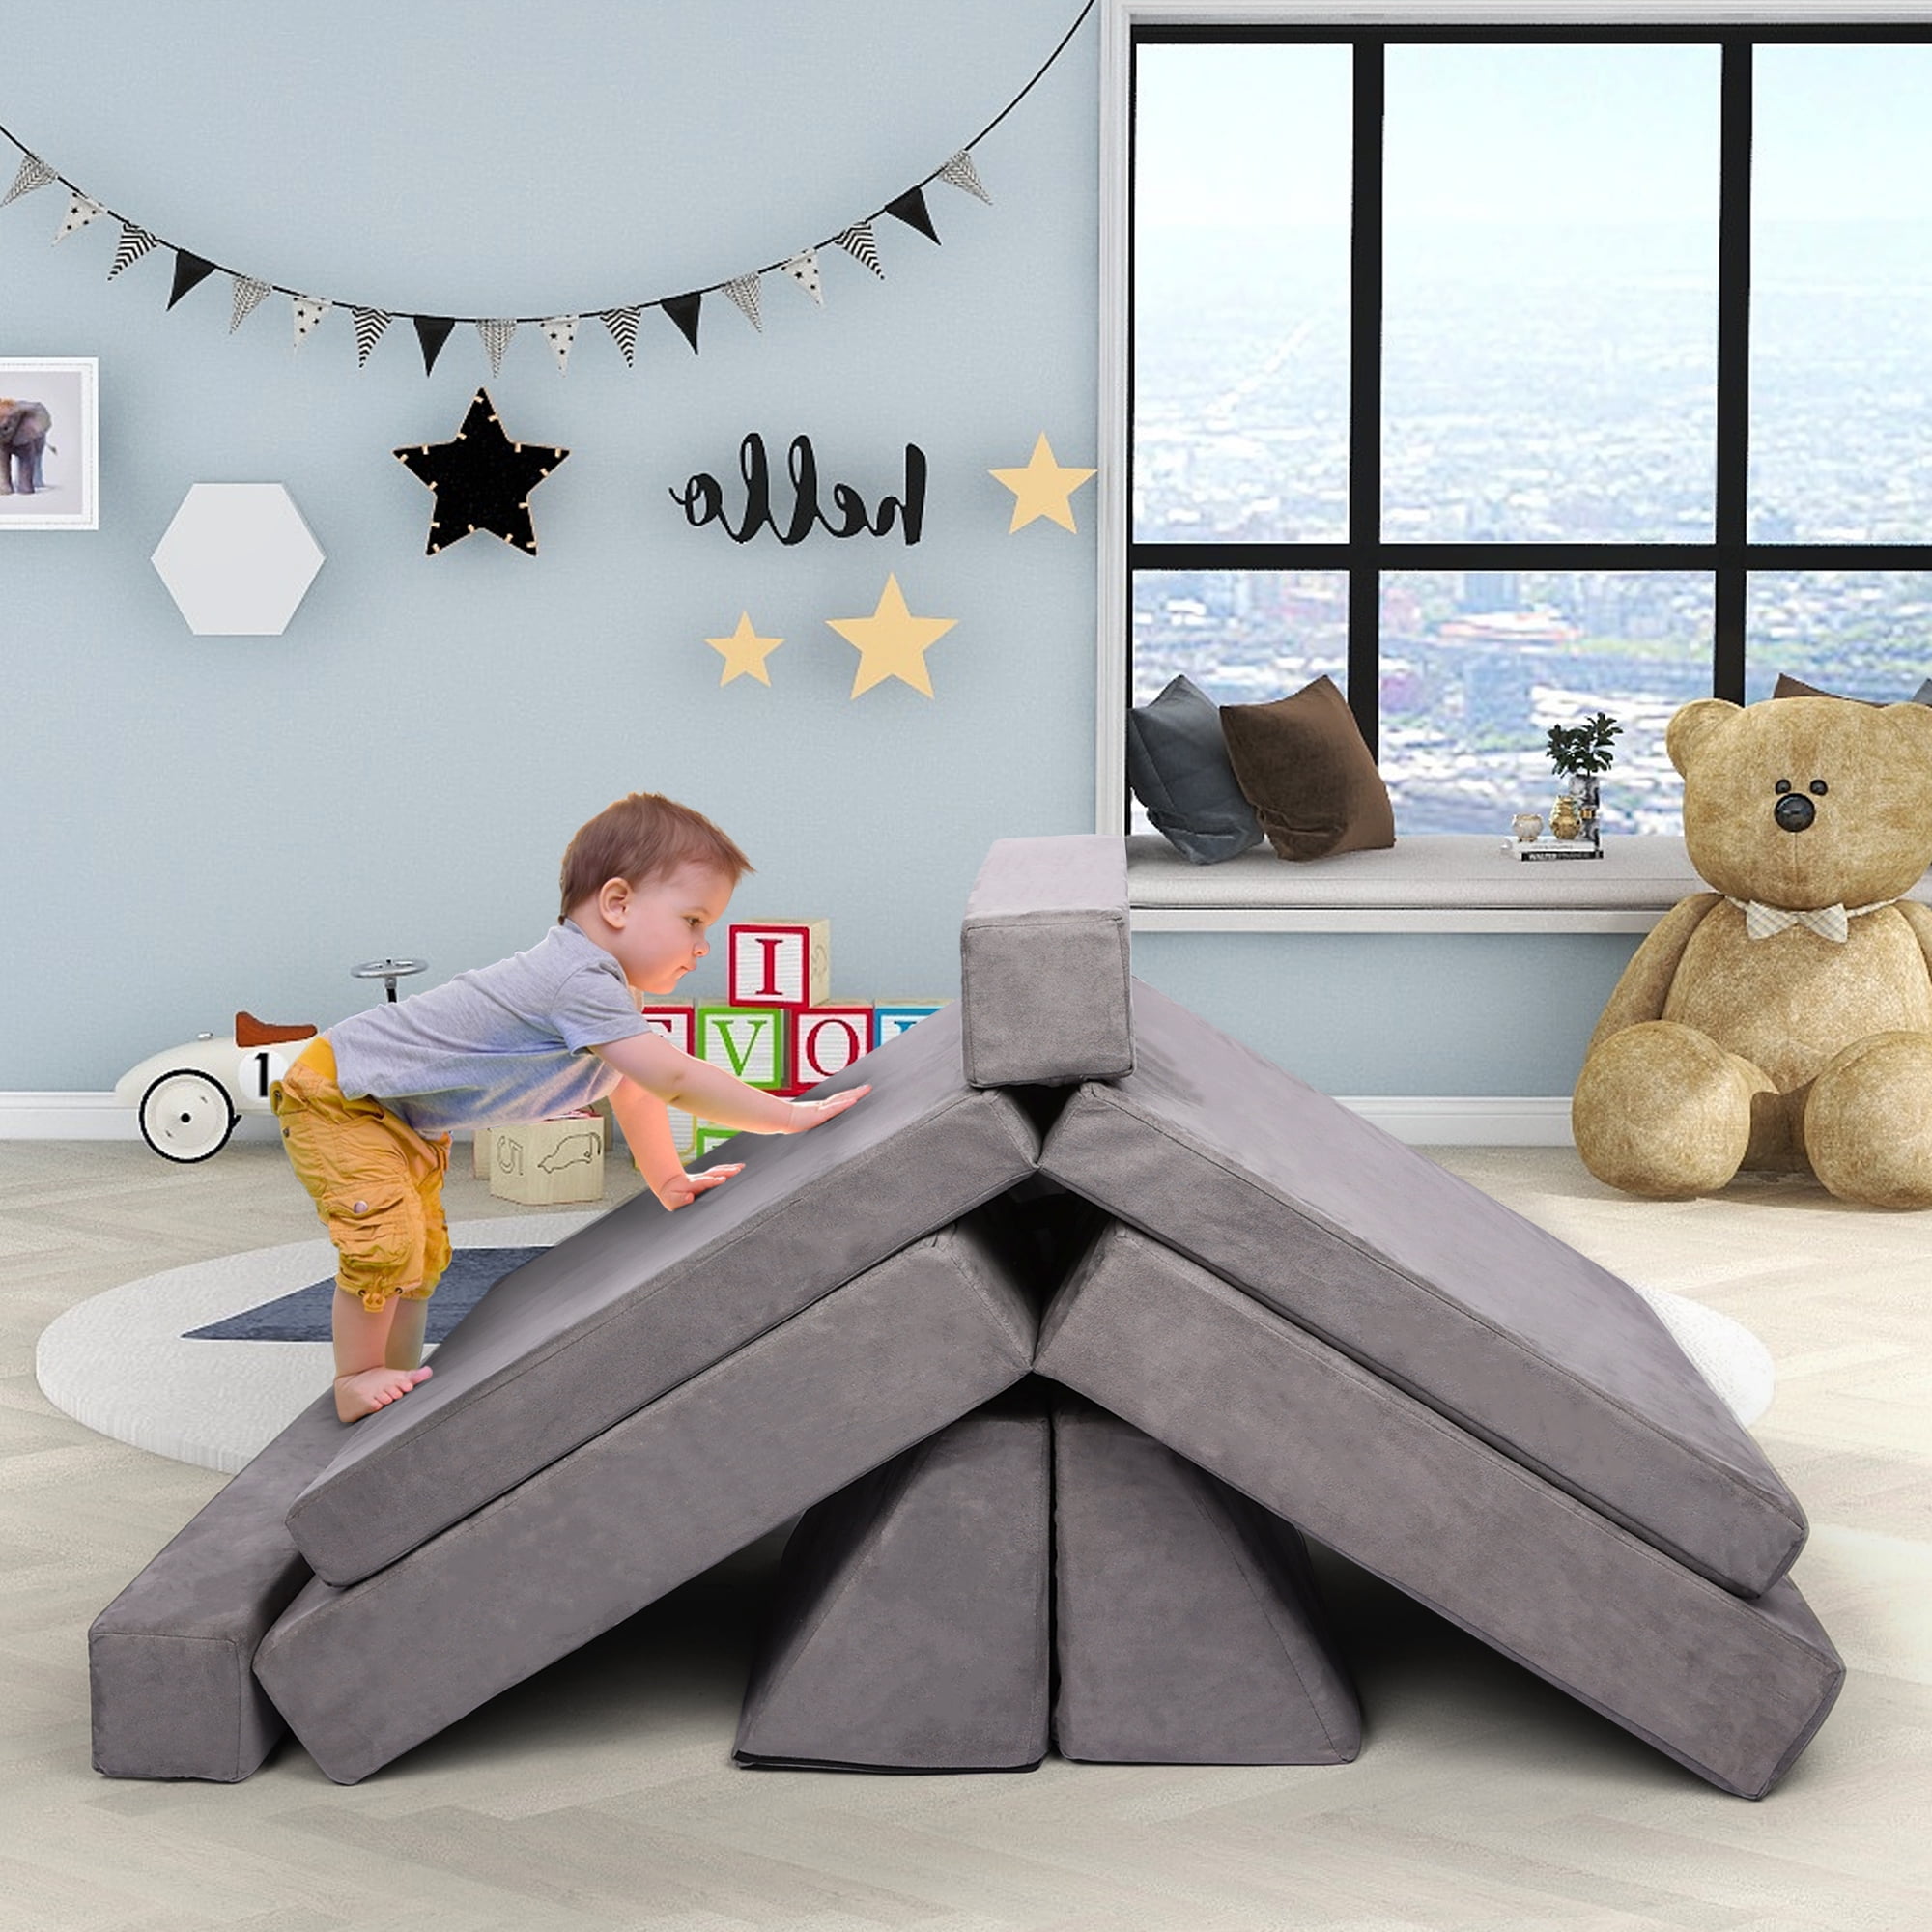 Tolead 6pcs Modular Imaginative Furniture Play Set, Couch, Sectional Sofa,  Gray